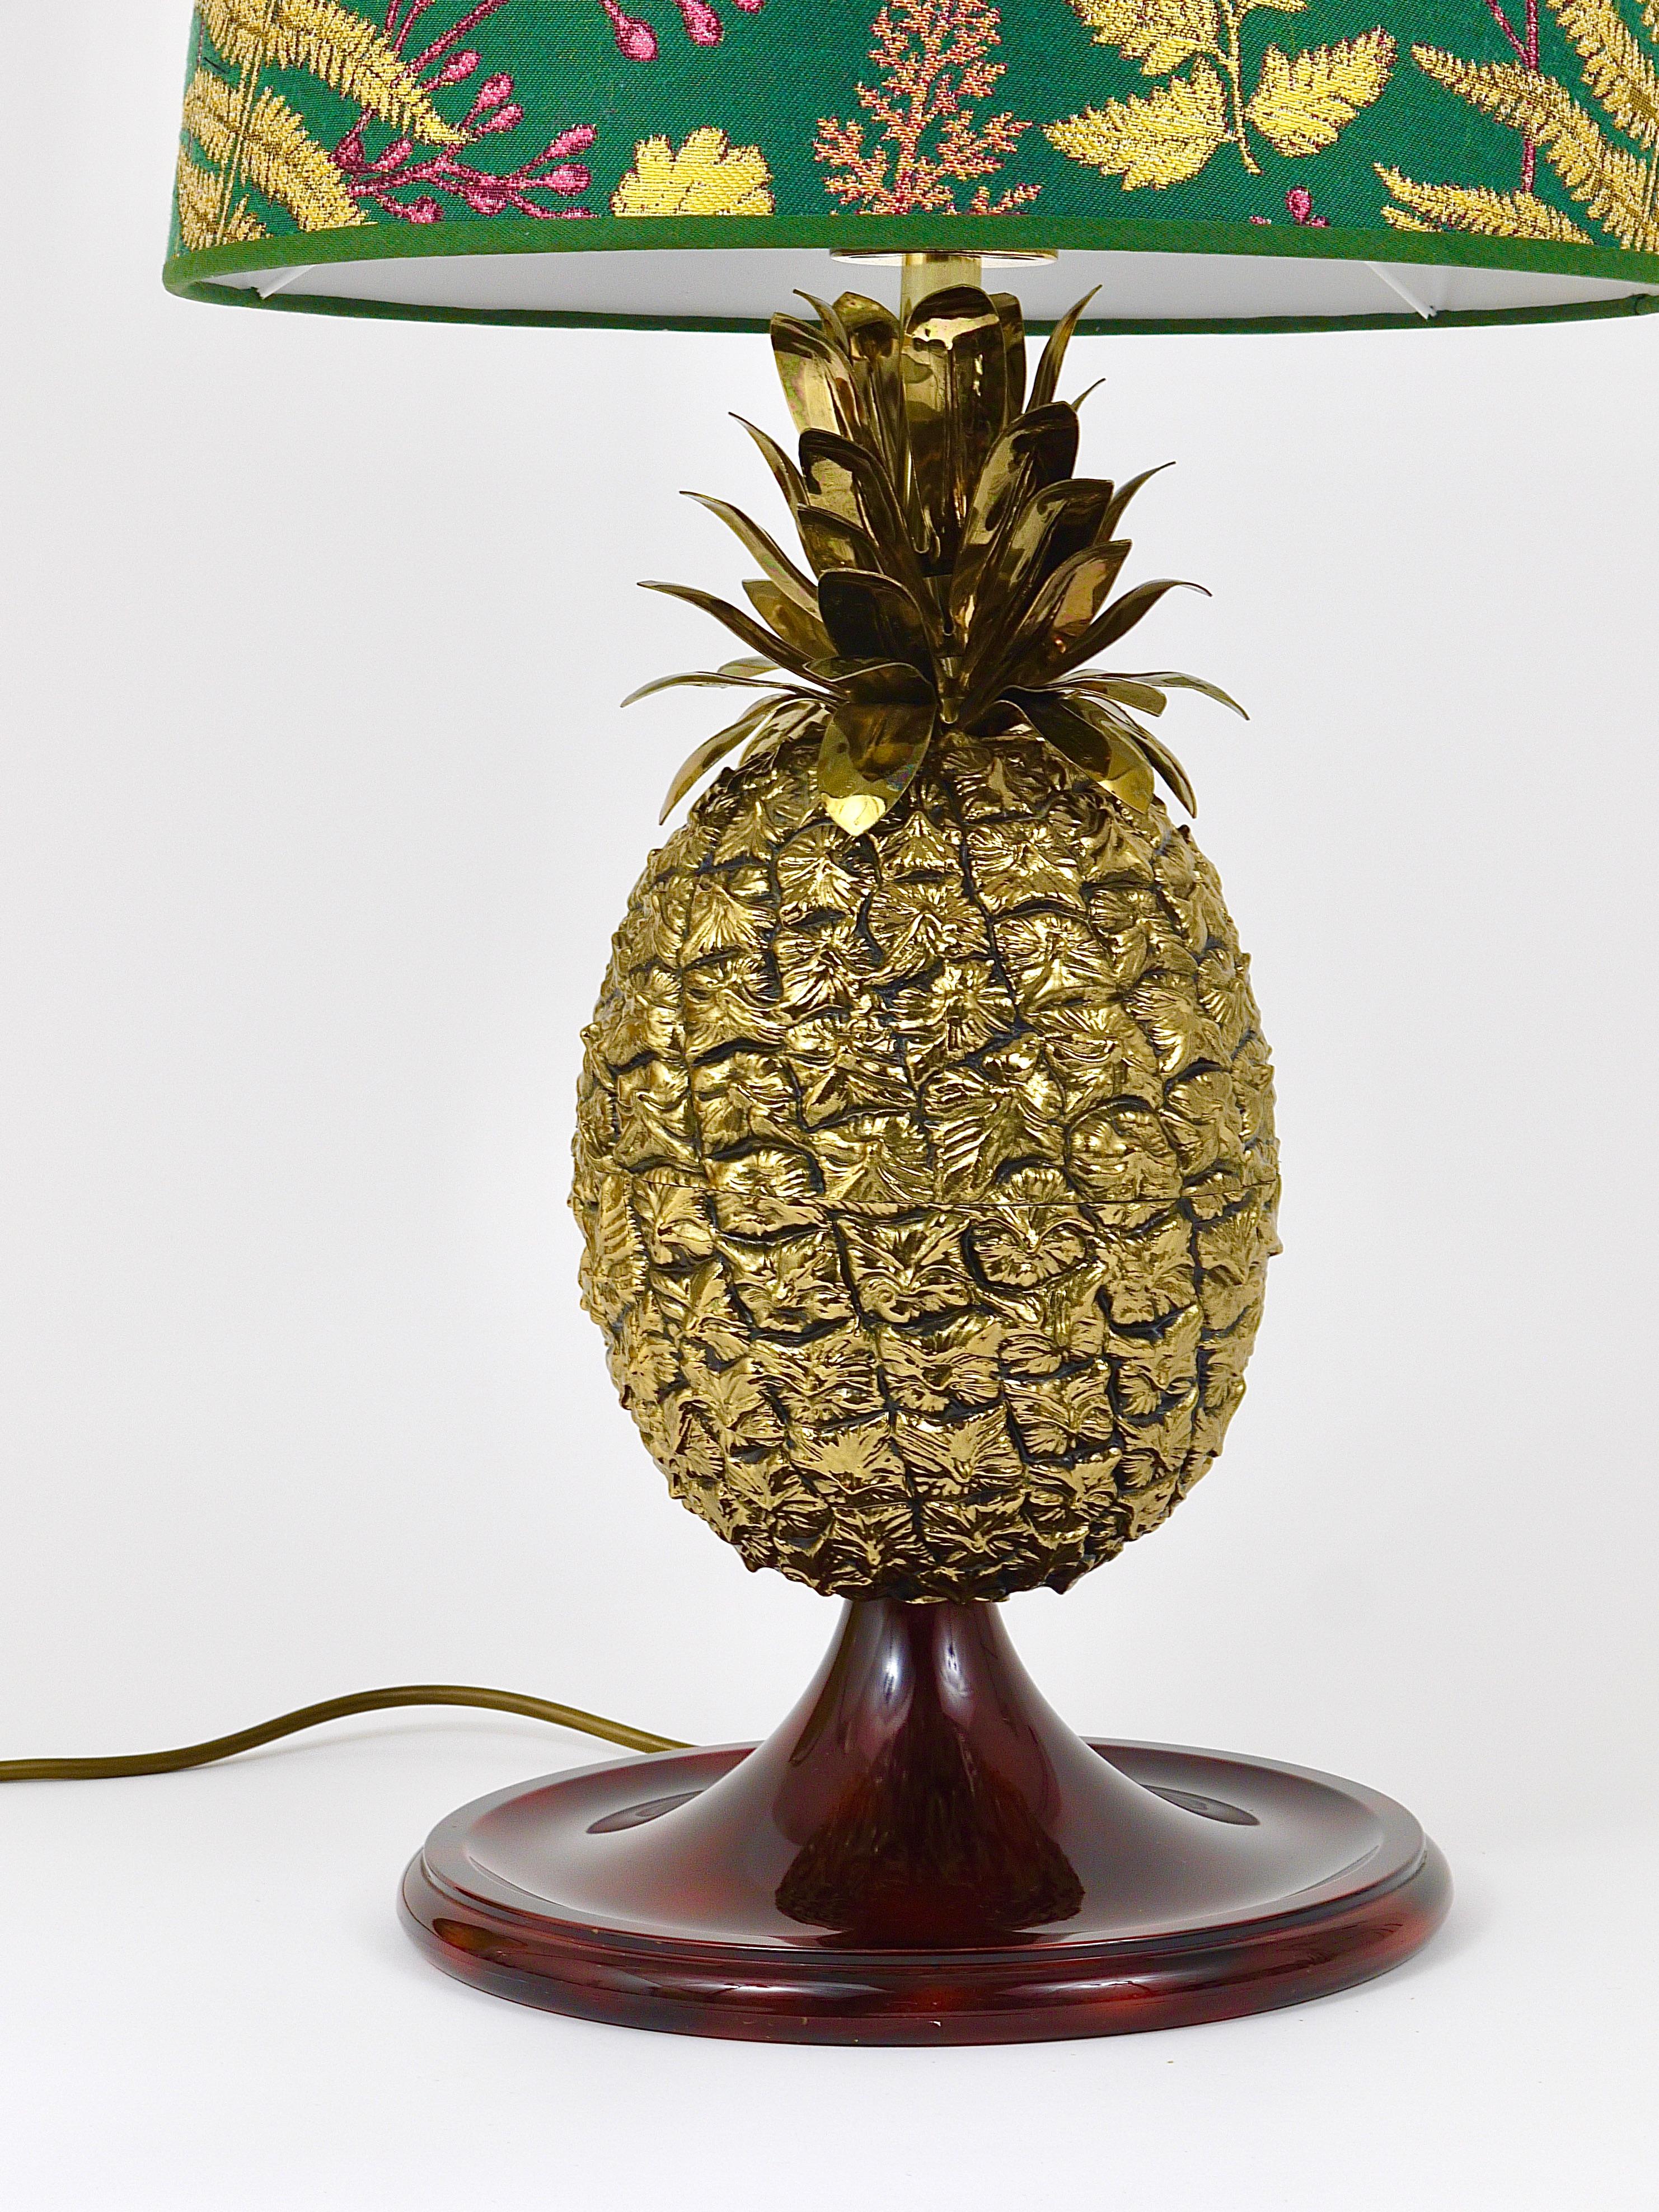 Mauro Manetti Hollywood Regency Pineapple Brass Table Lamp, Italy, 1970s For Sale 5